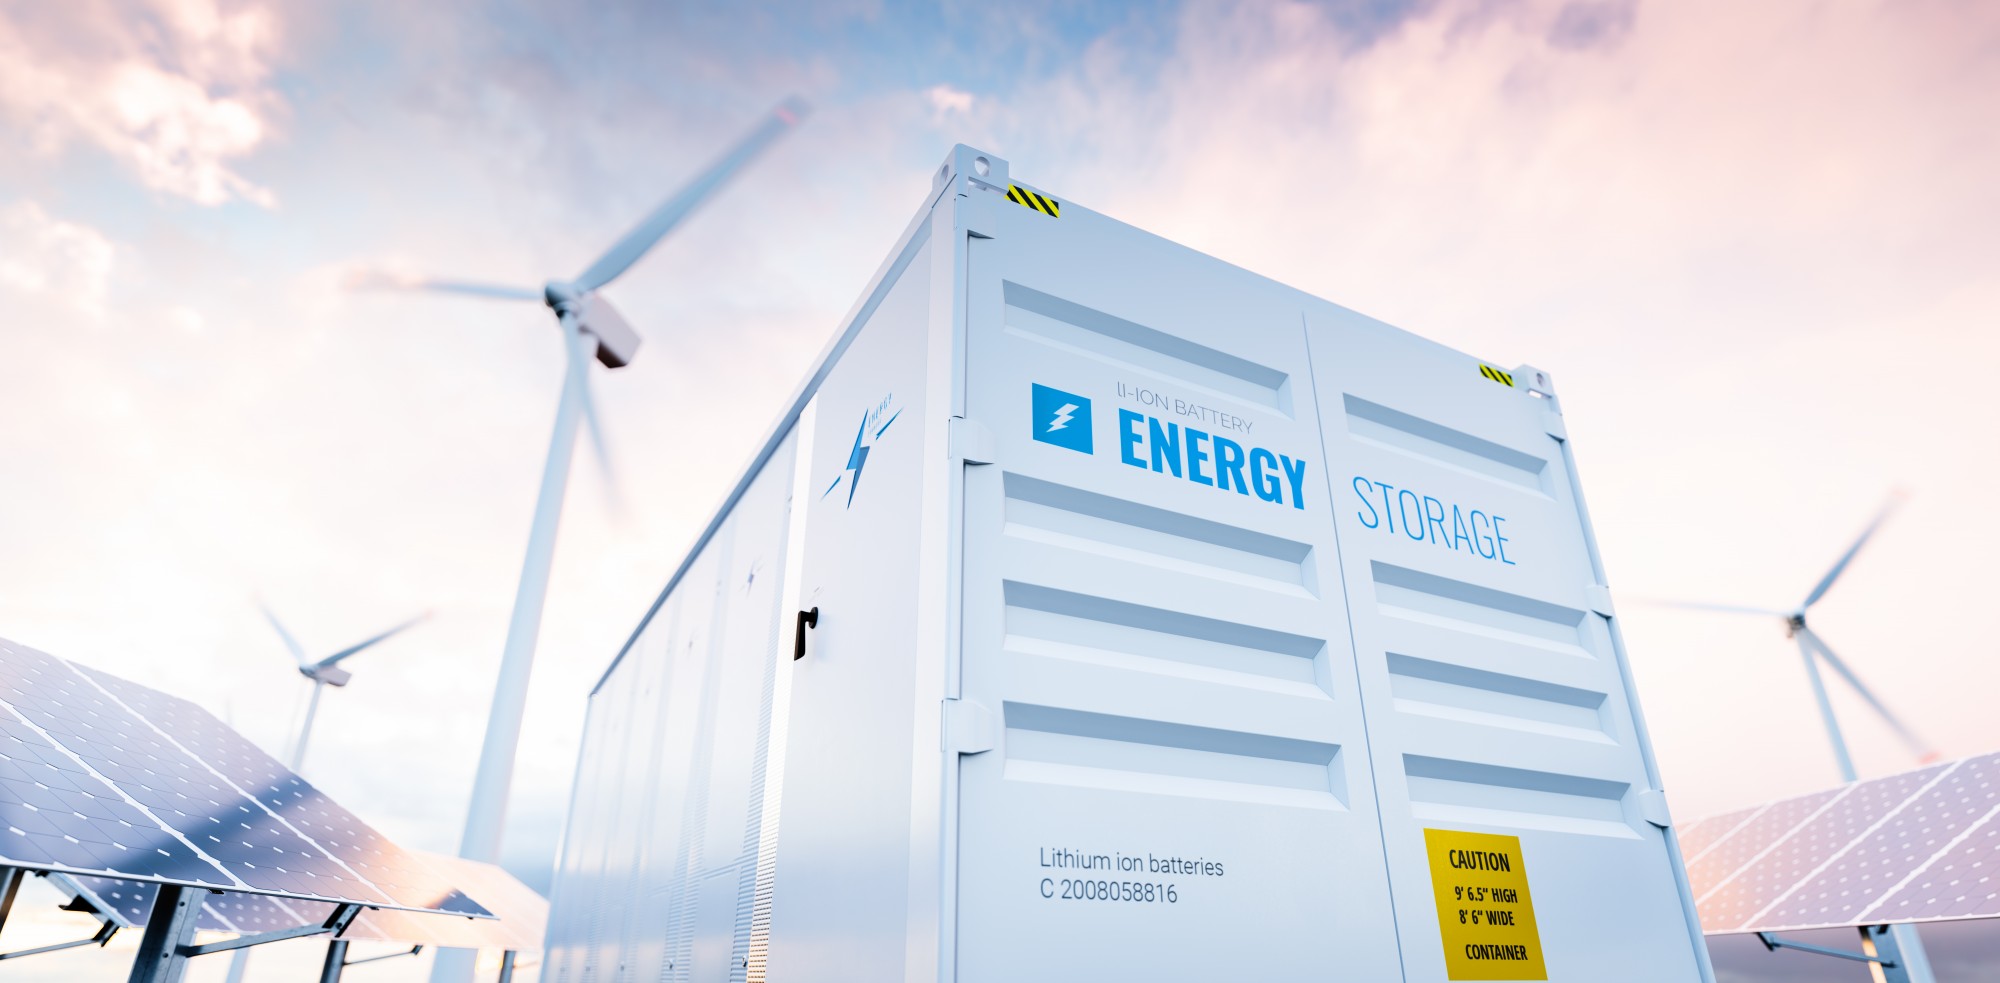 Camp Lejeune Begins Operating 11-MW Battery Project